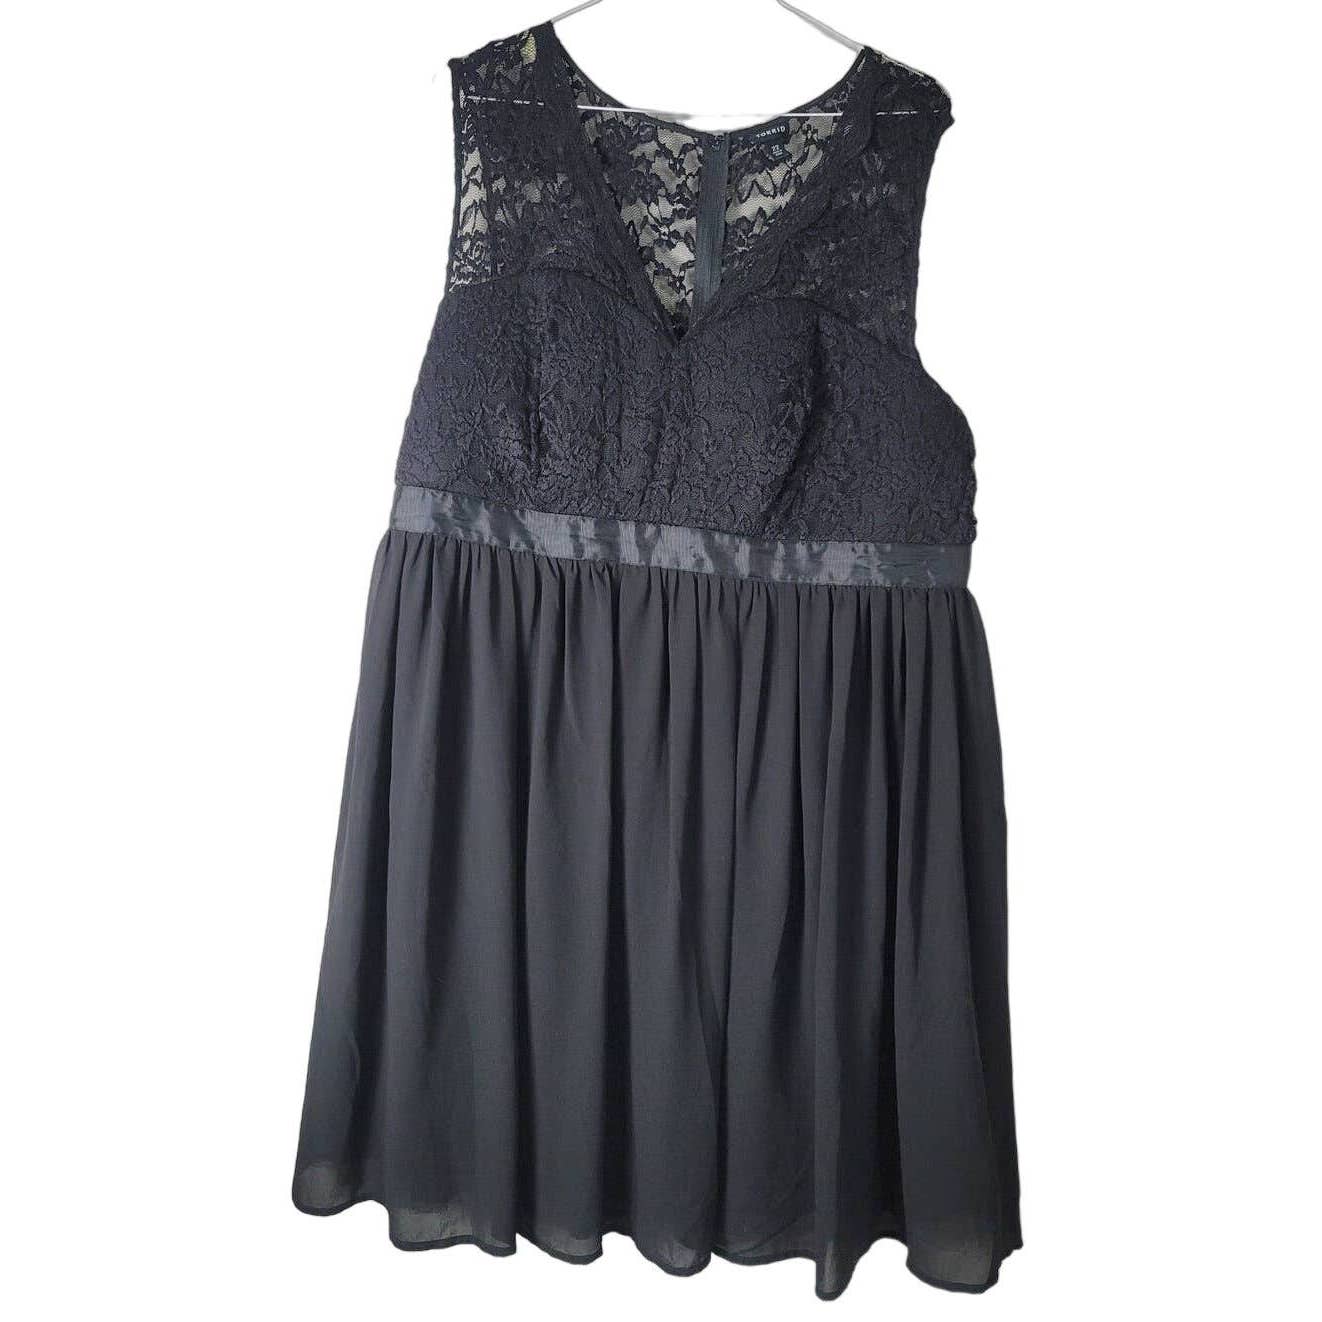 Torrid Black Lace Dress Sleeveless Chiffon Fit and Flare Party Size 22